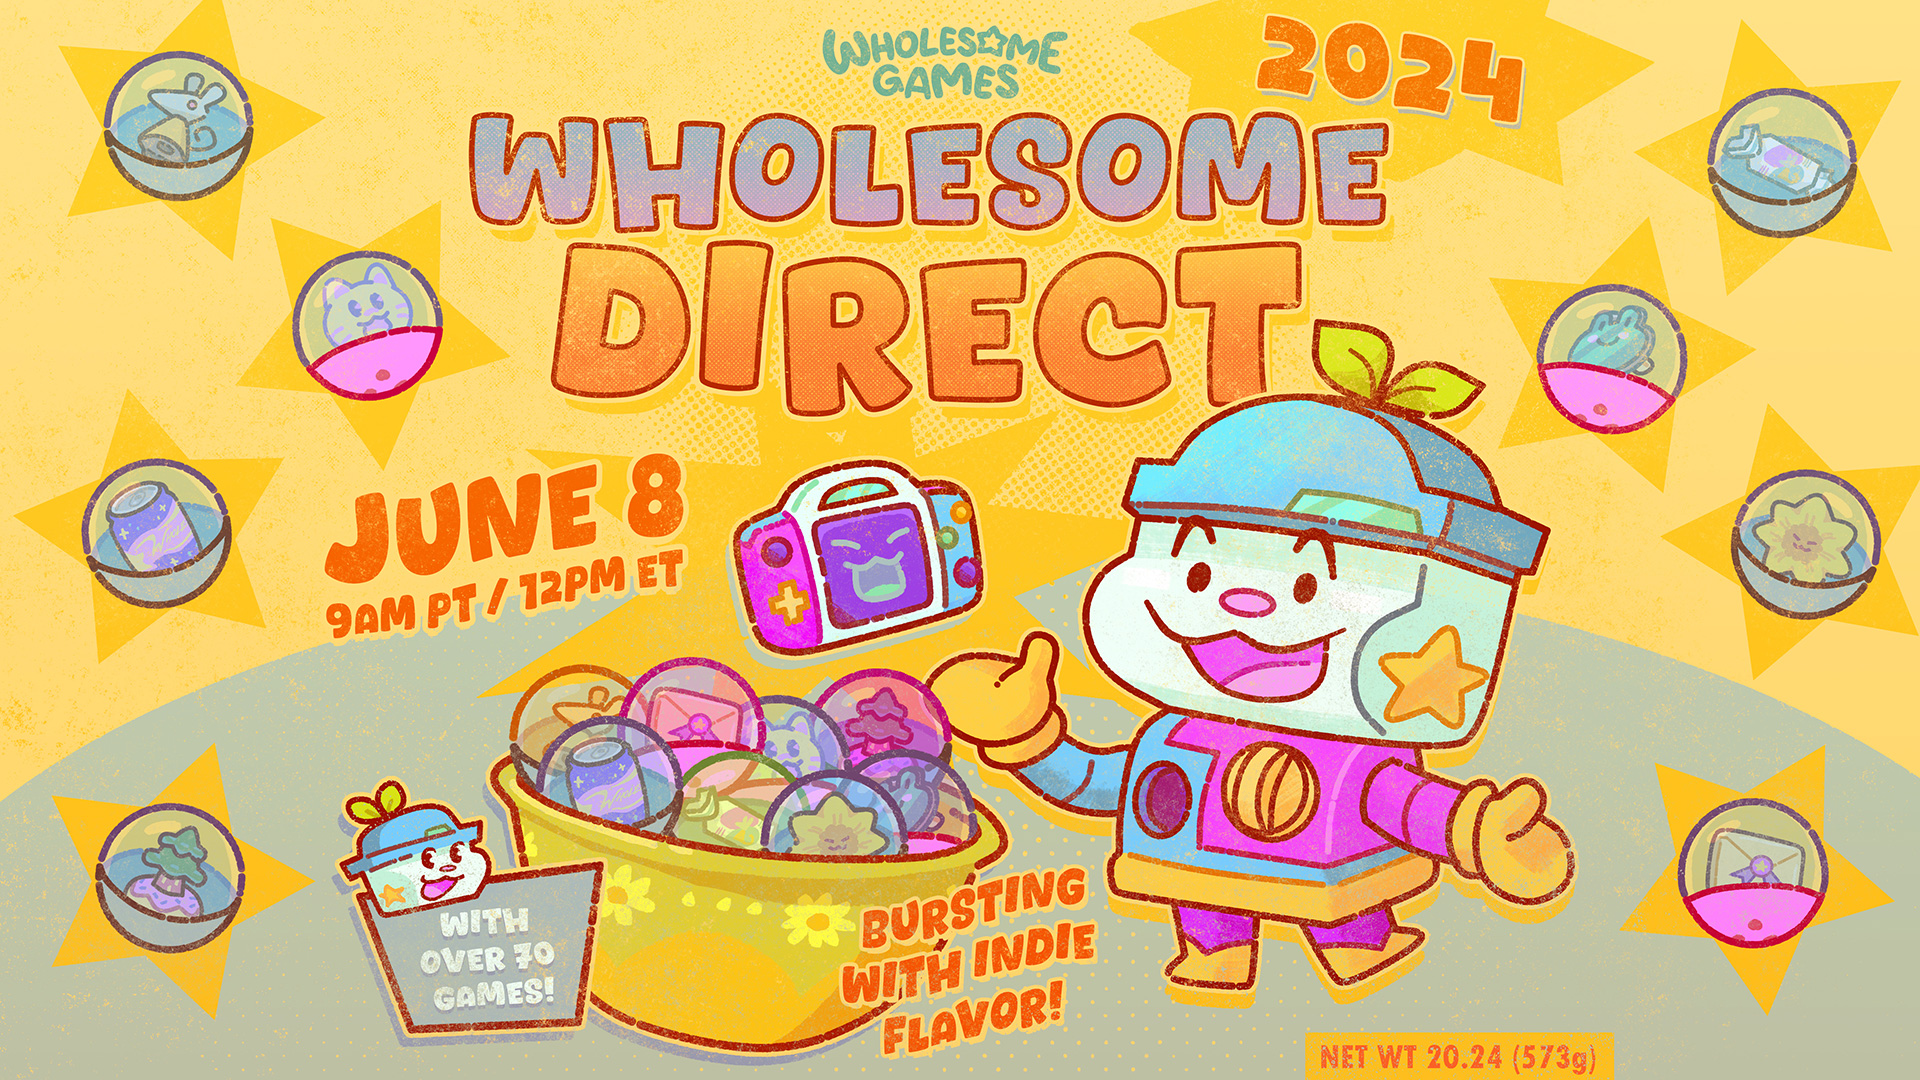 Wholesome Direct 2024 logo with timing details